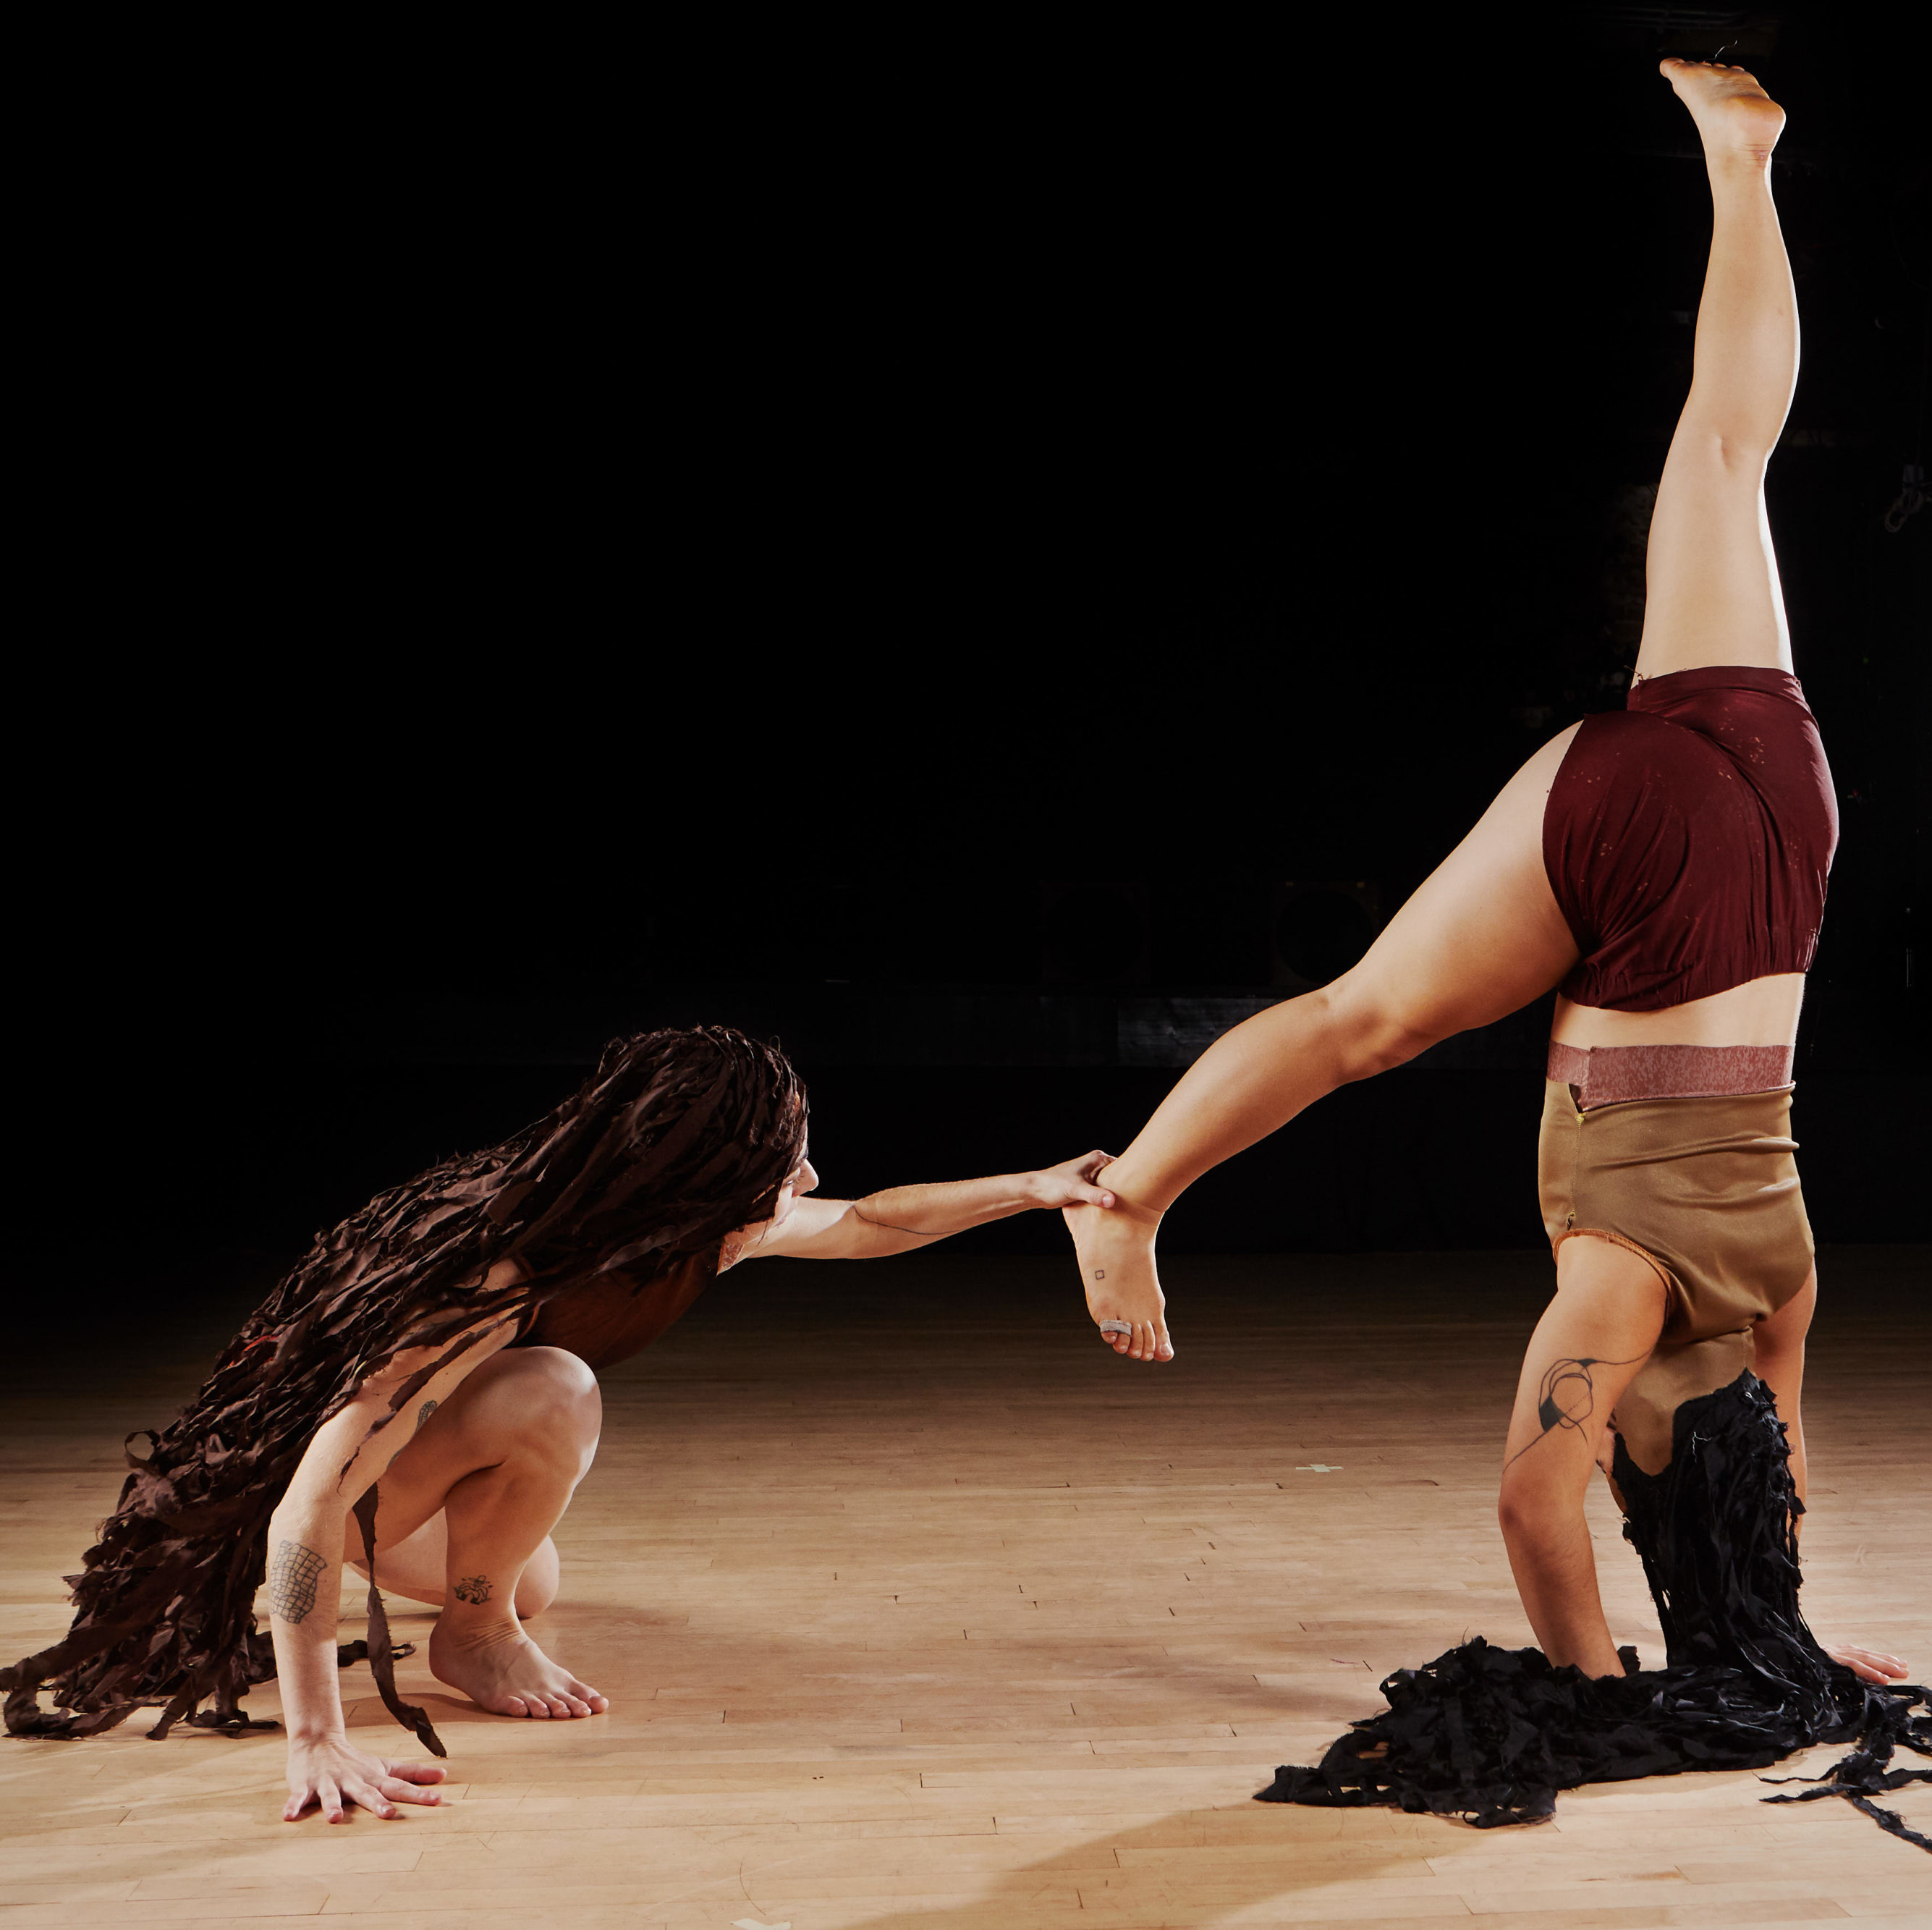 One female bodied dancer does a handstand while another female dancer pulls down her heel beneath her